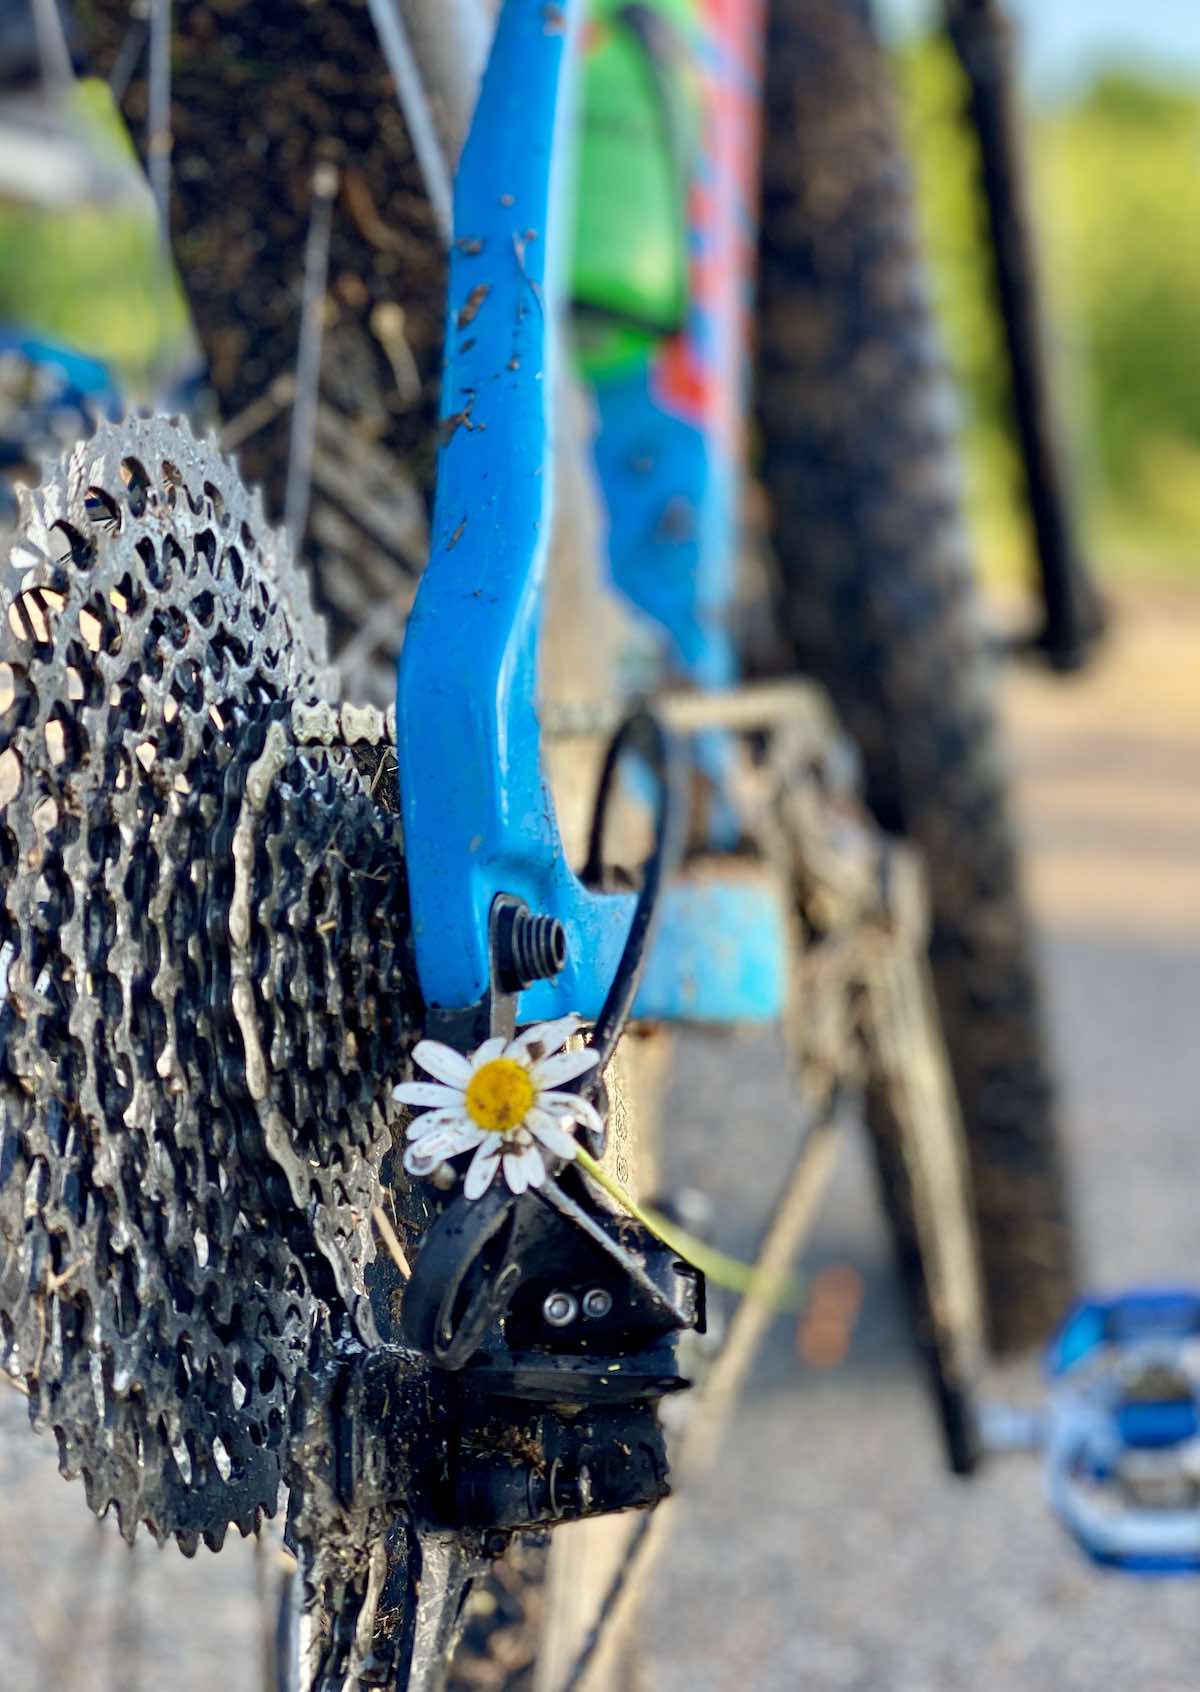 bikerumor pic of the day close up shot of a daisy stuck in the rear shifter of a blue mountain bike.